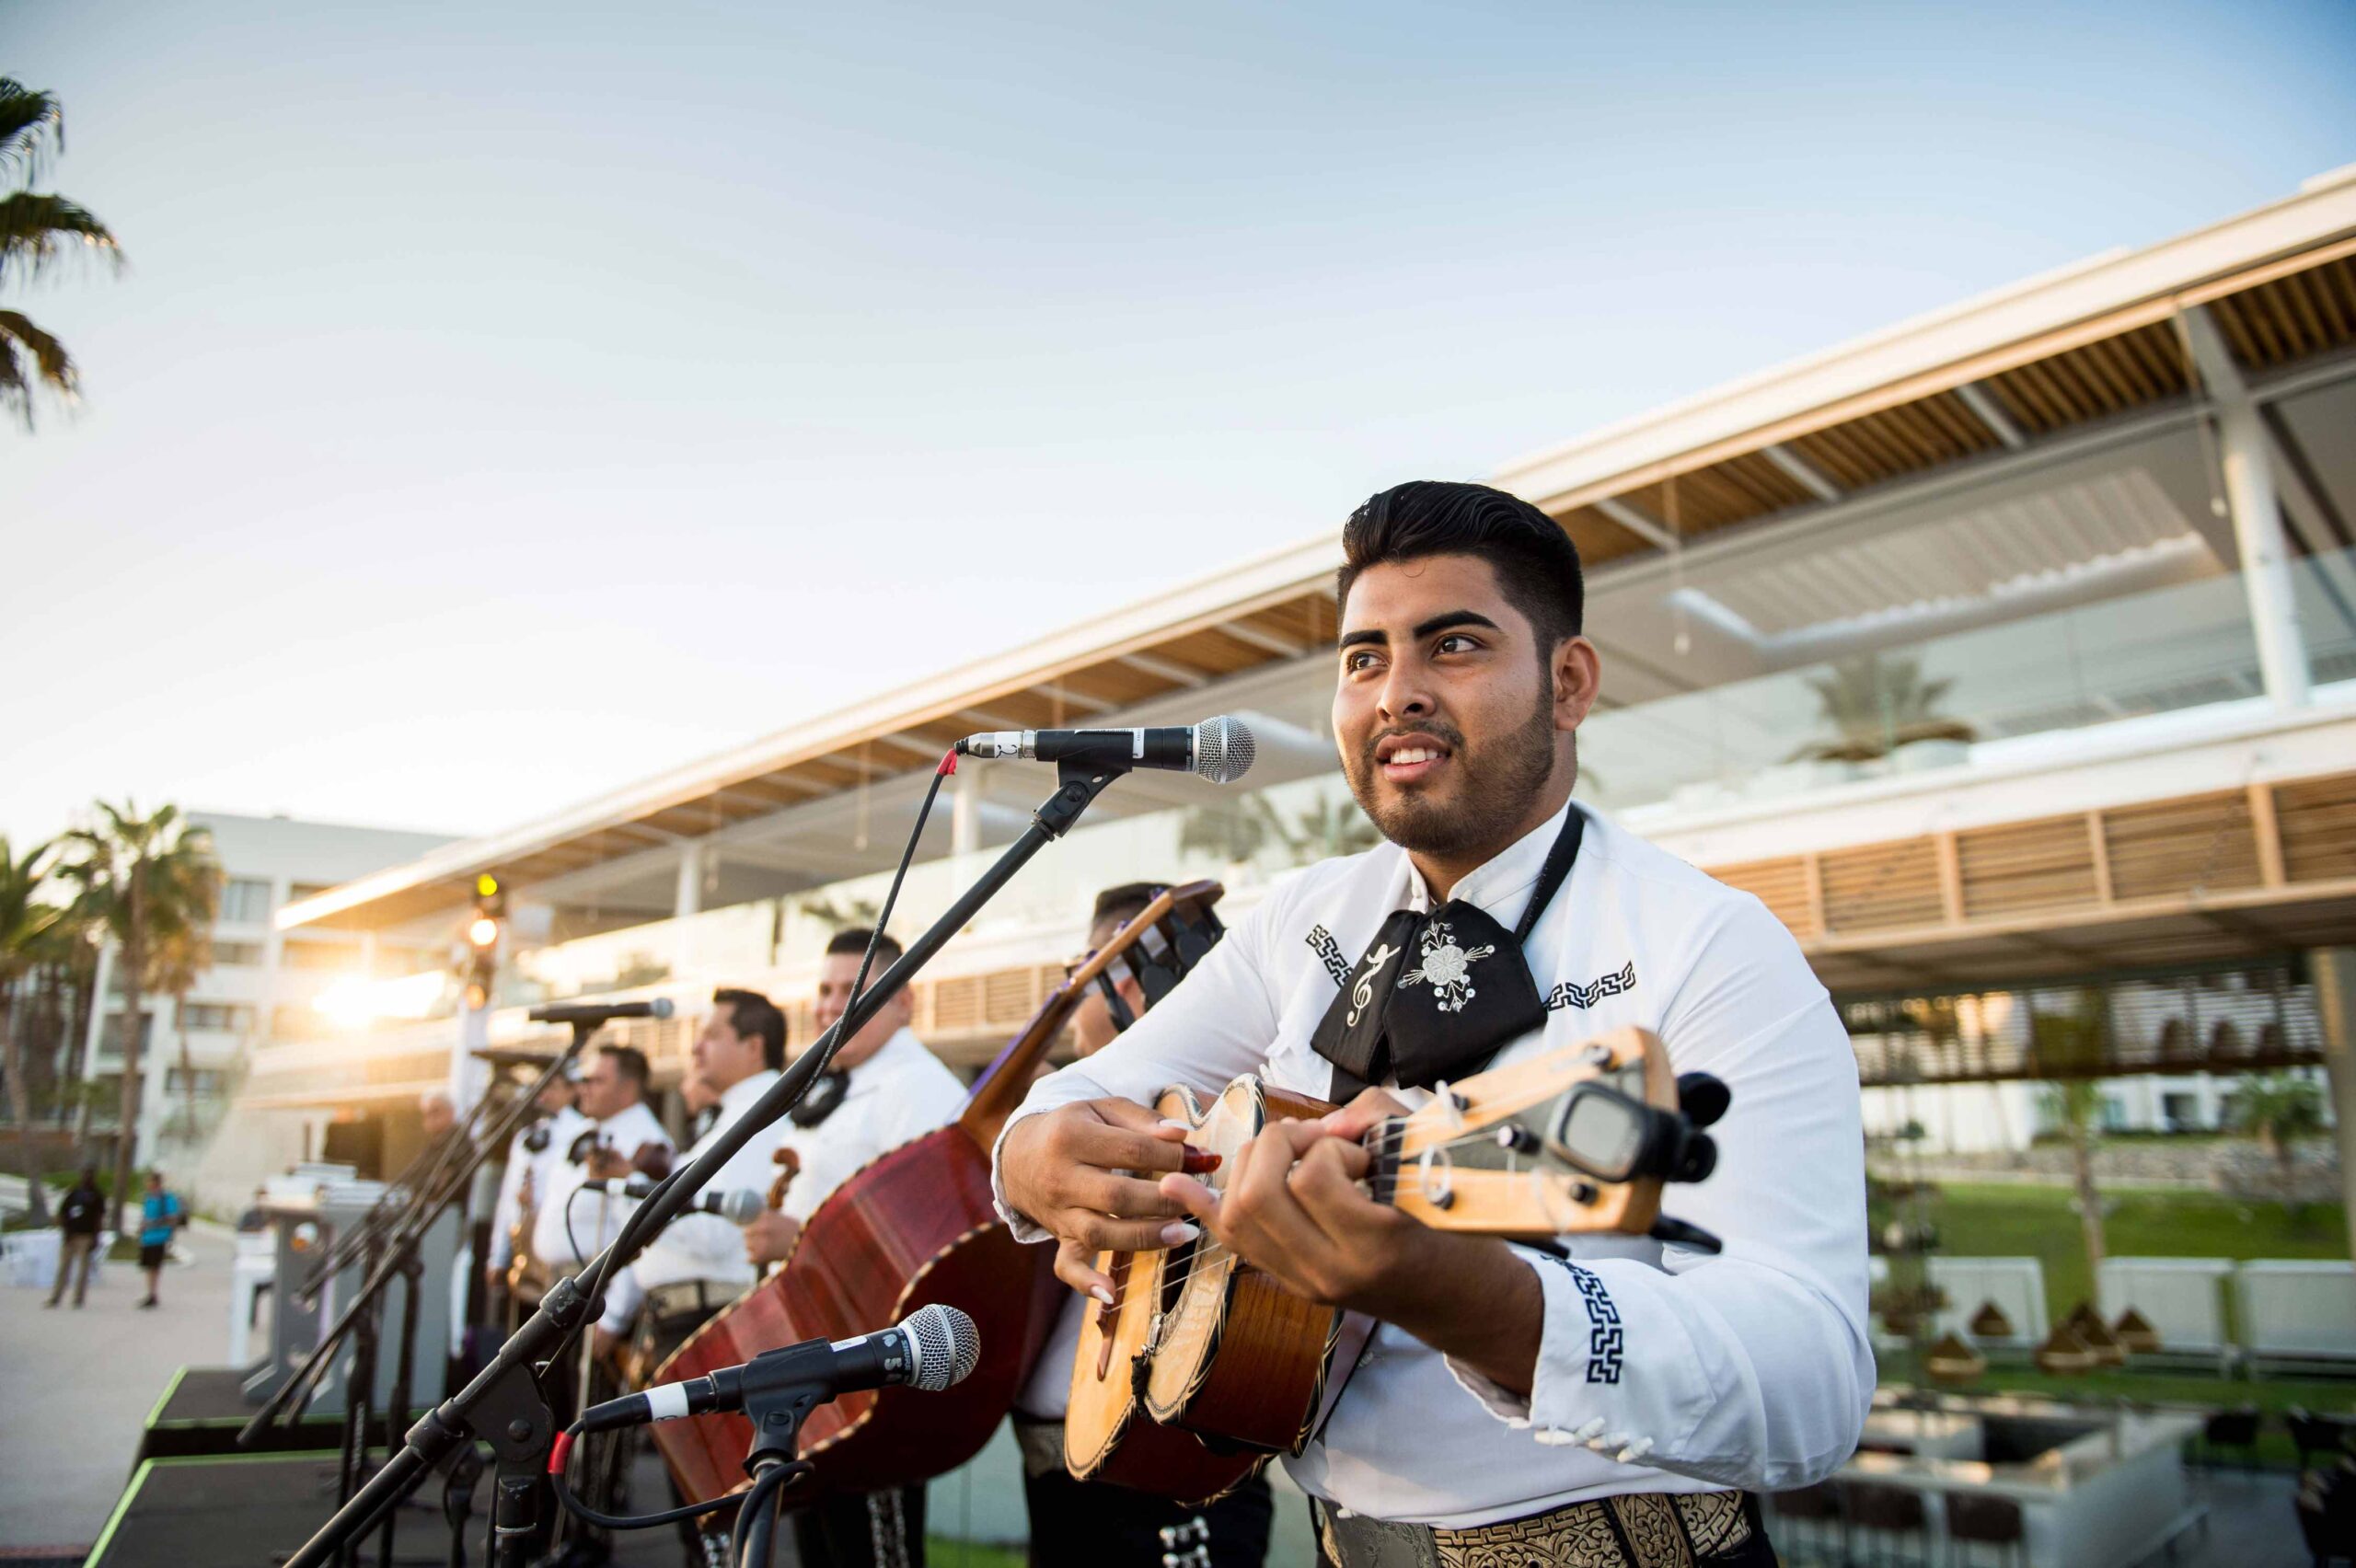 Mariachis perform outside a resort at at a welcome reception for a corporate celebration. Featured mariachi is singing and strumming the guitar. 